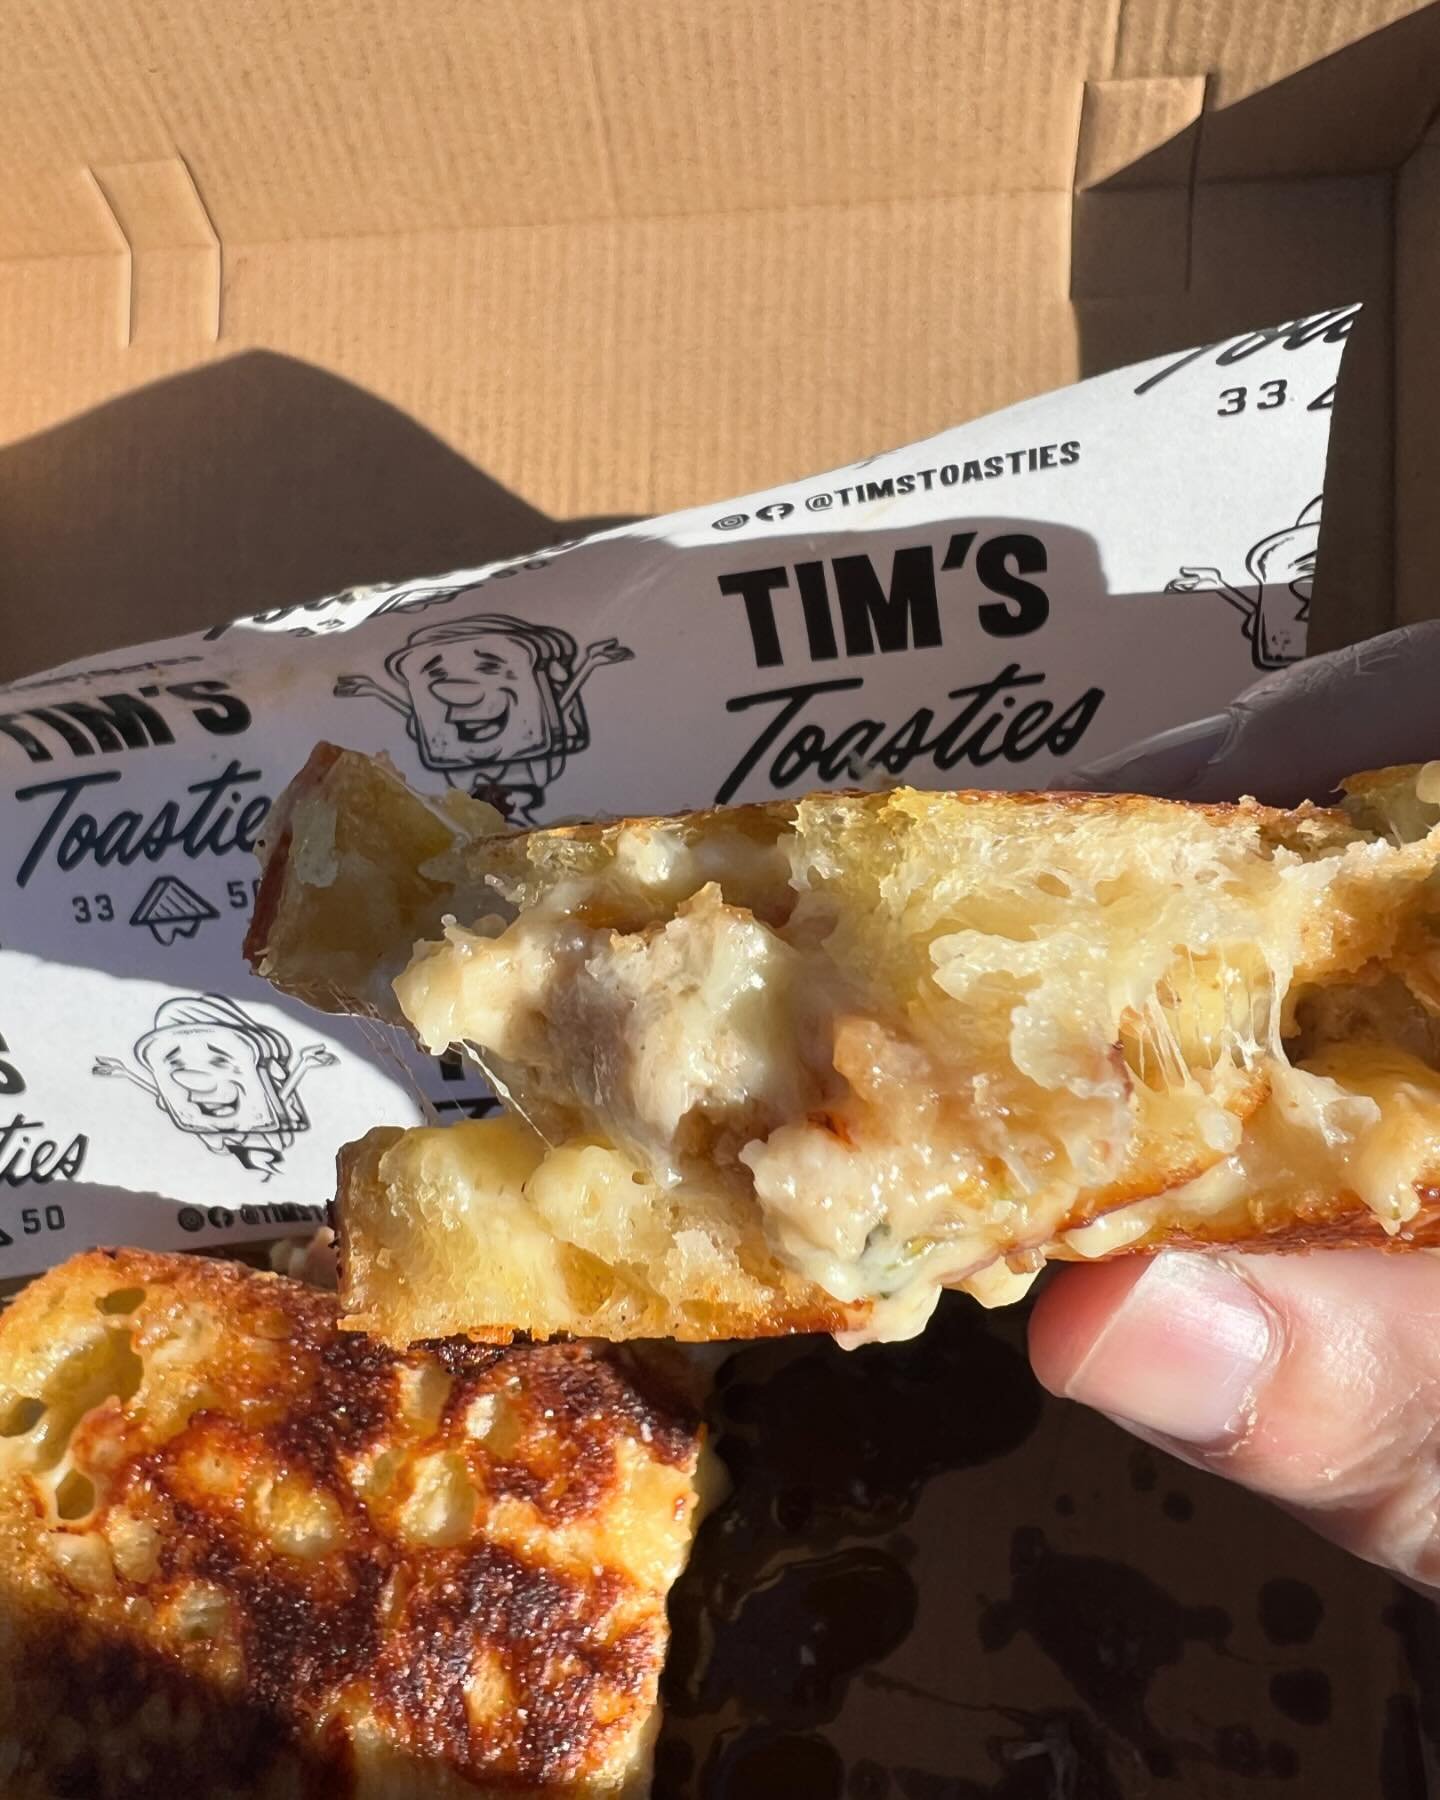 🤤 A toastie for breakfast! The Buffy the Vampire Slayer - lots of garlic, cheese and chicken 🧄🧀🐔

Thanks @timbonefood! It was beautiful 🙏